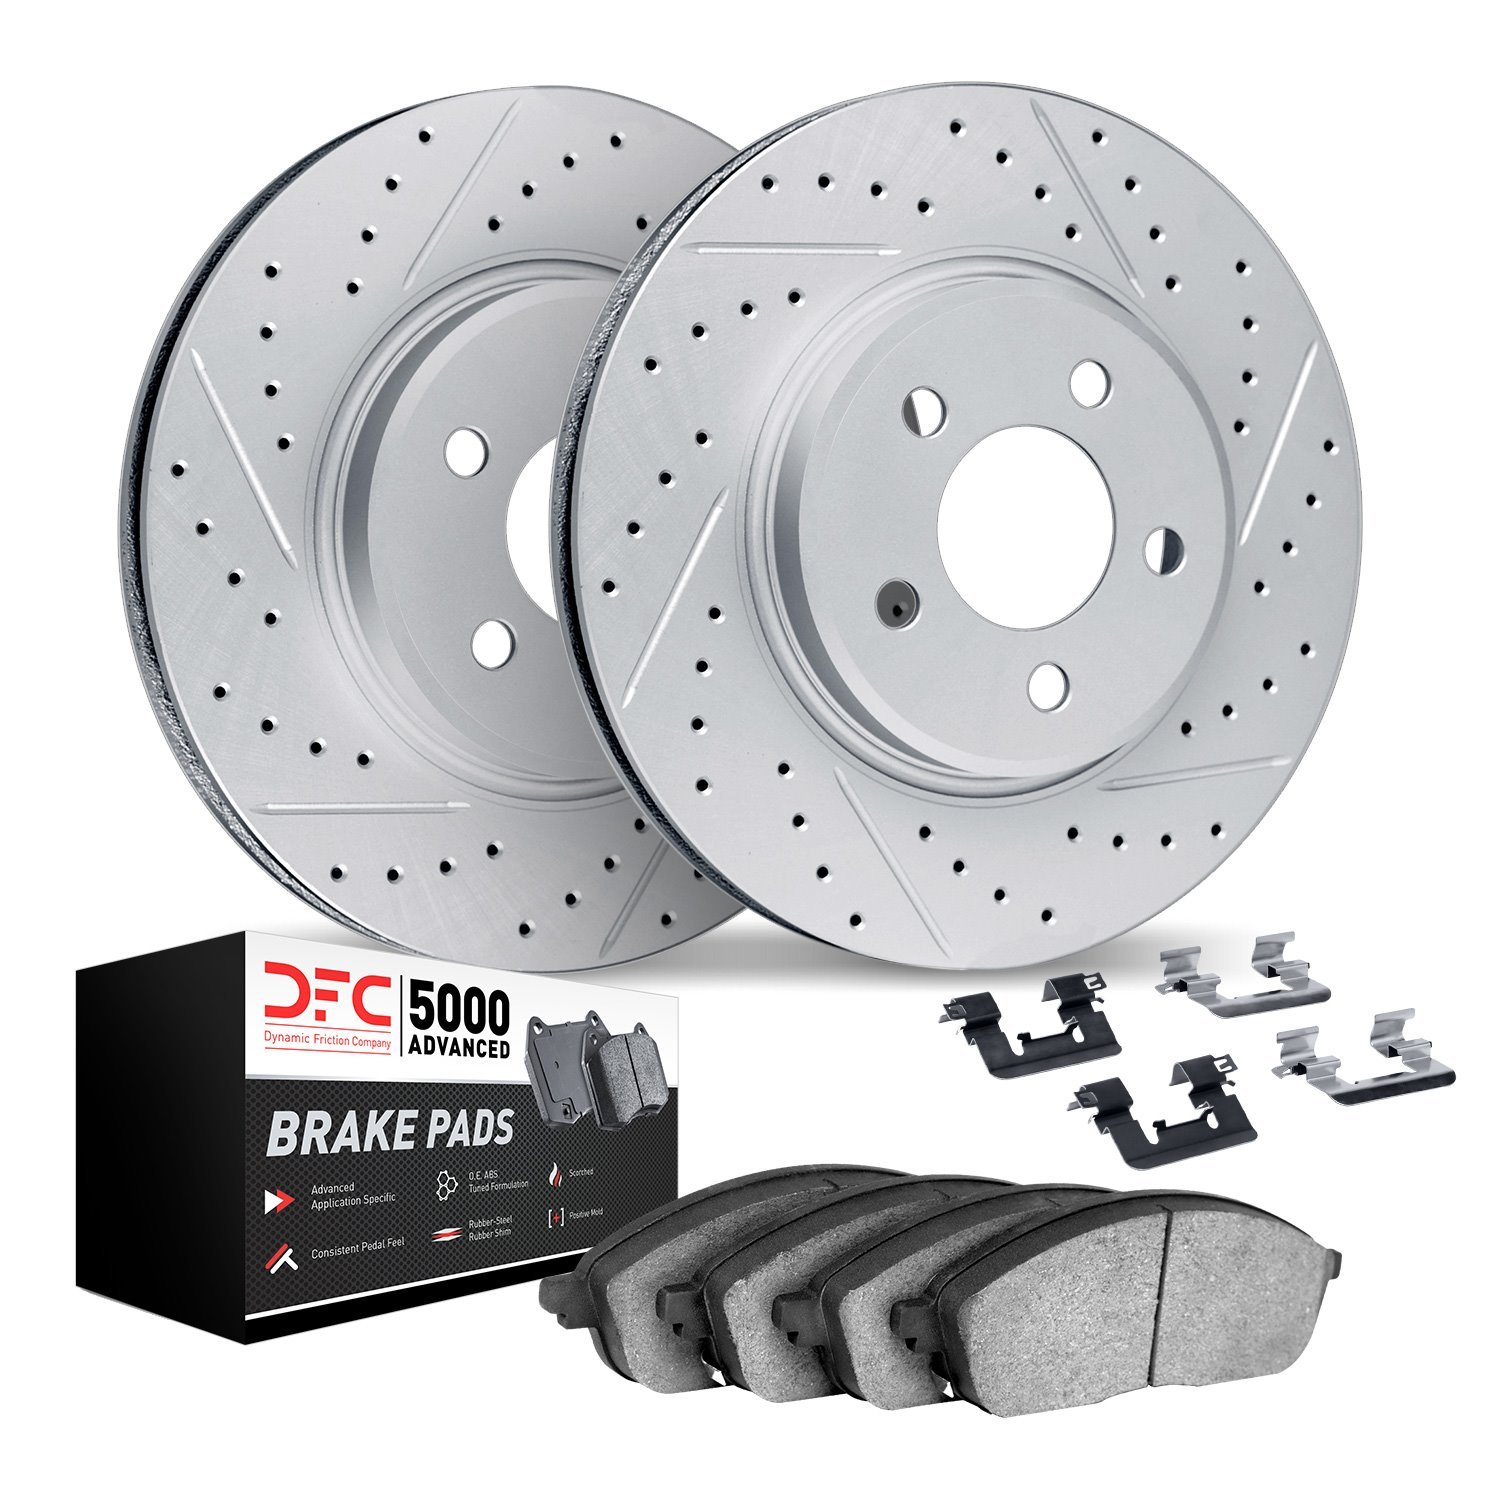 2512-46056 Geoperformance Drilled/Slotted Rotors w/5000 Advanced Brake Pads Kit & Hardware, Fits Select GM, Position: Rear